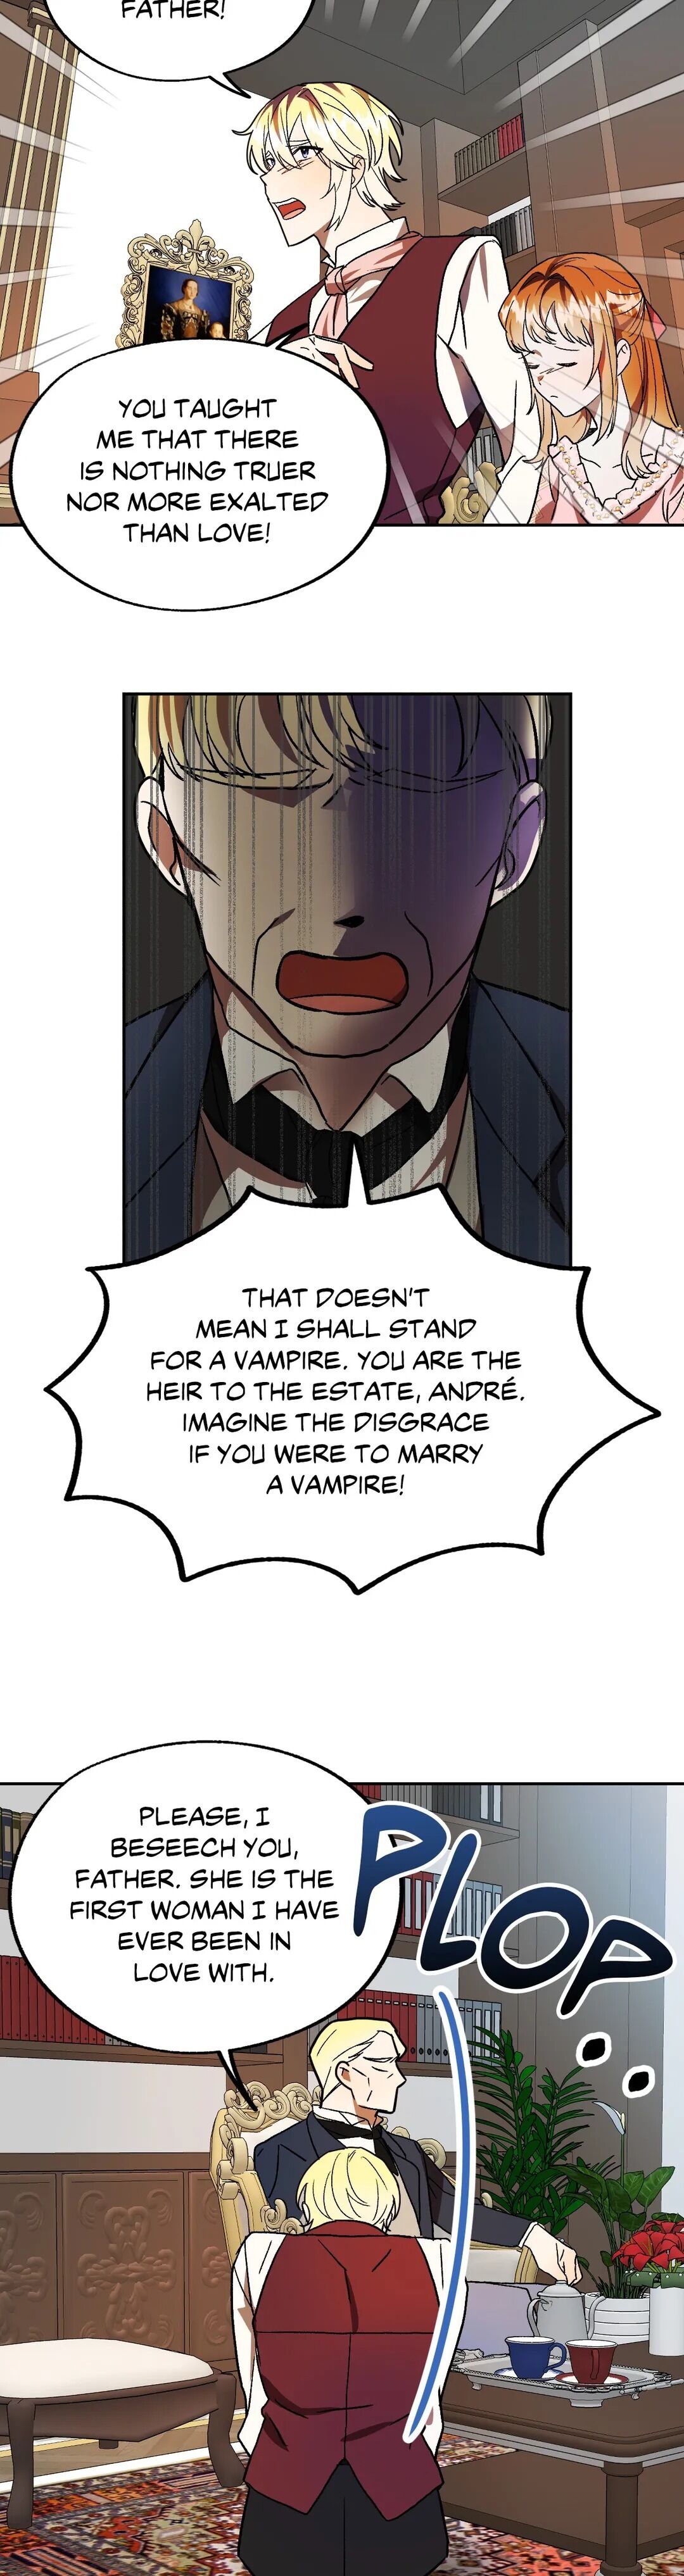 My Fiancée Is A Vampire Hunter! - Page 2